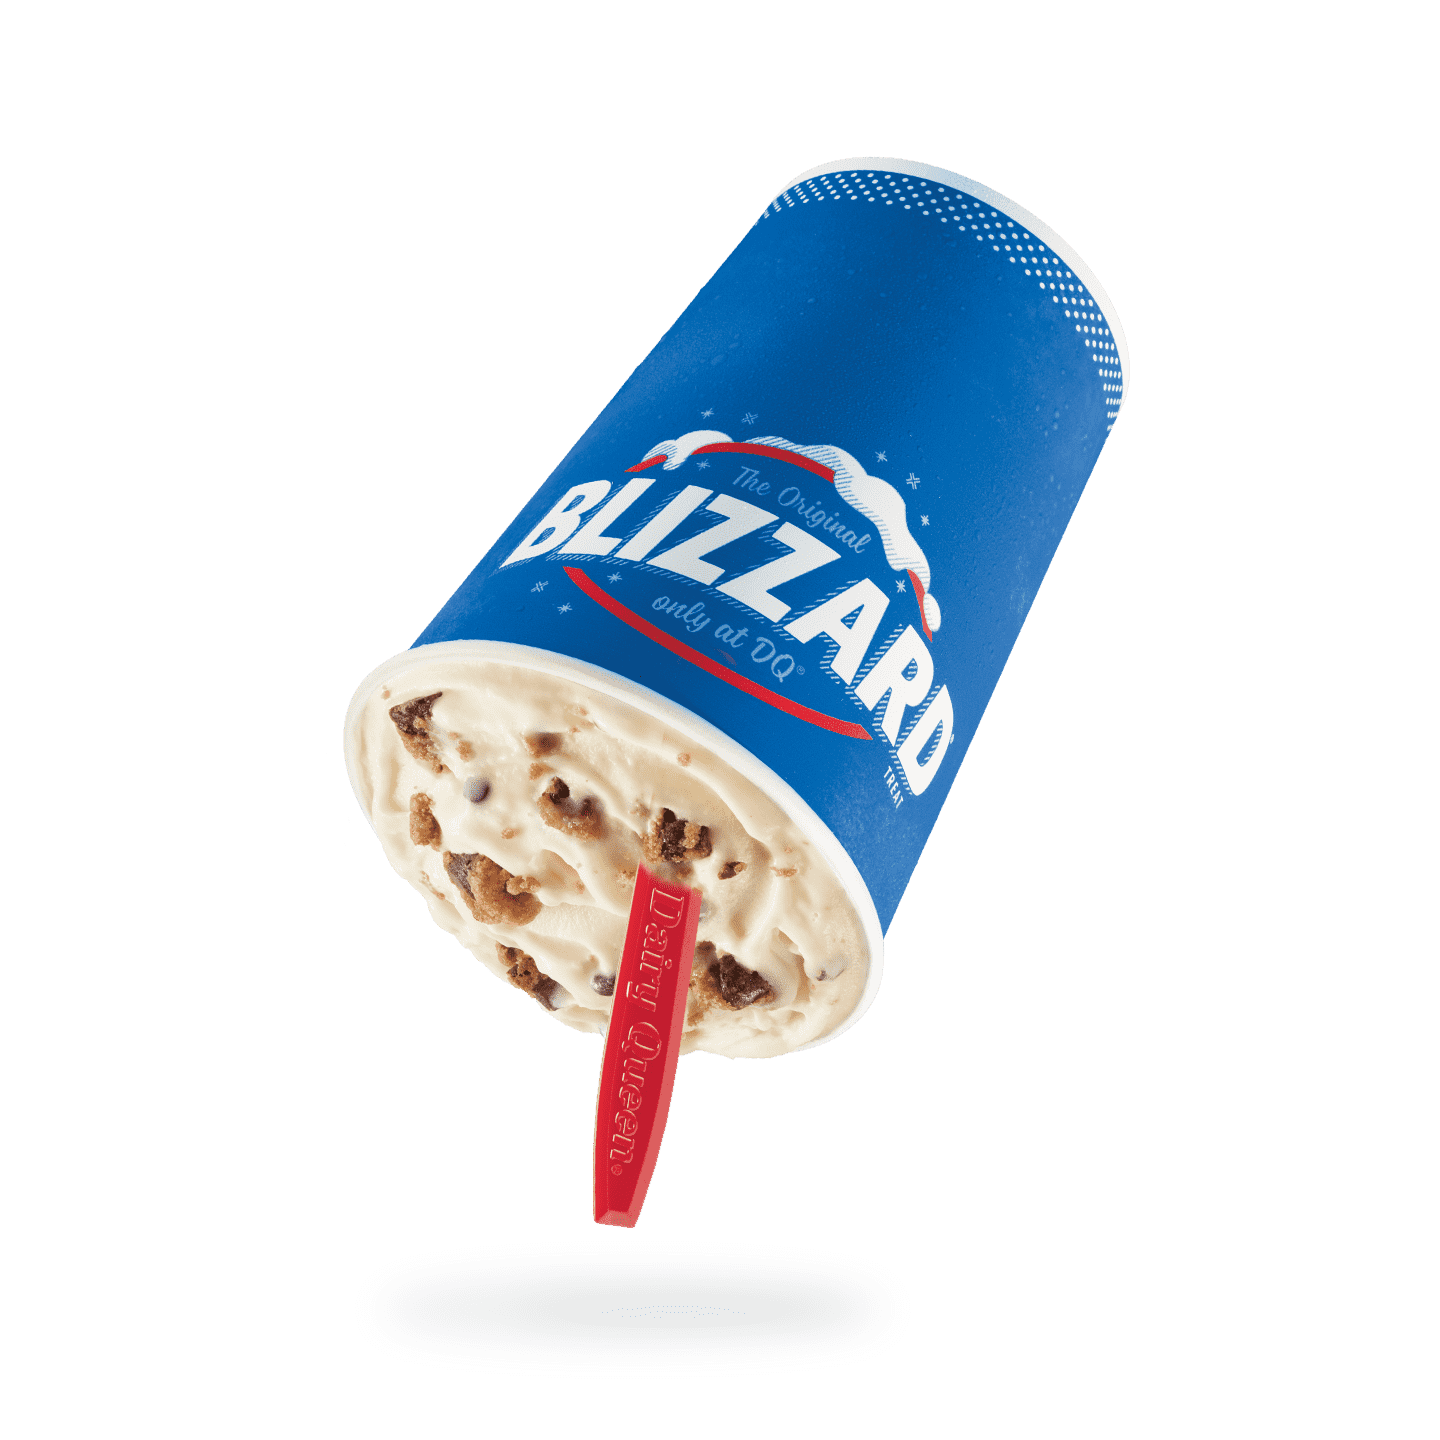 Dairy Queen Large Nestle Toll House Chocolate Chip Cookie Blizzard Nutrition Facts